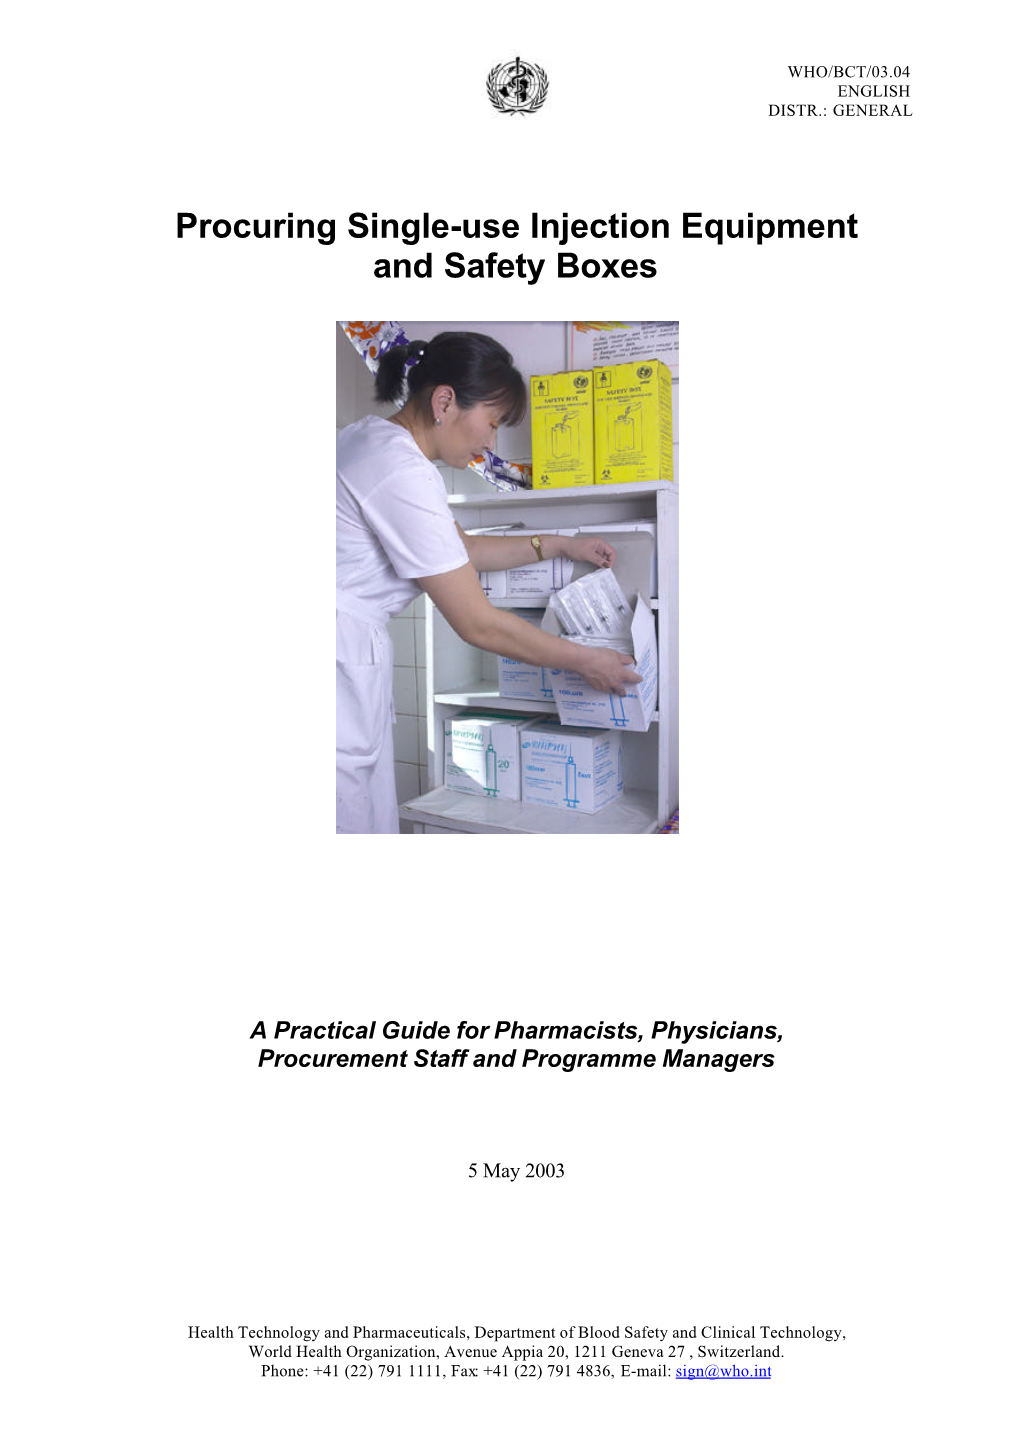 Procuring Single-Use Injection Equipment and Safety Boxes